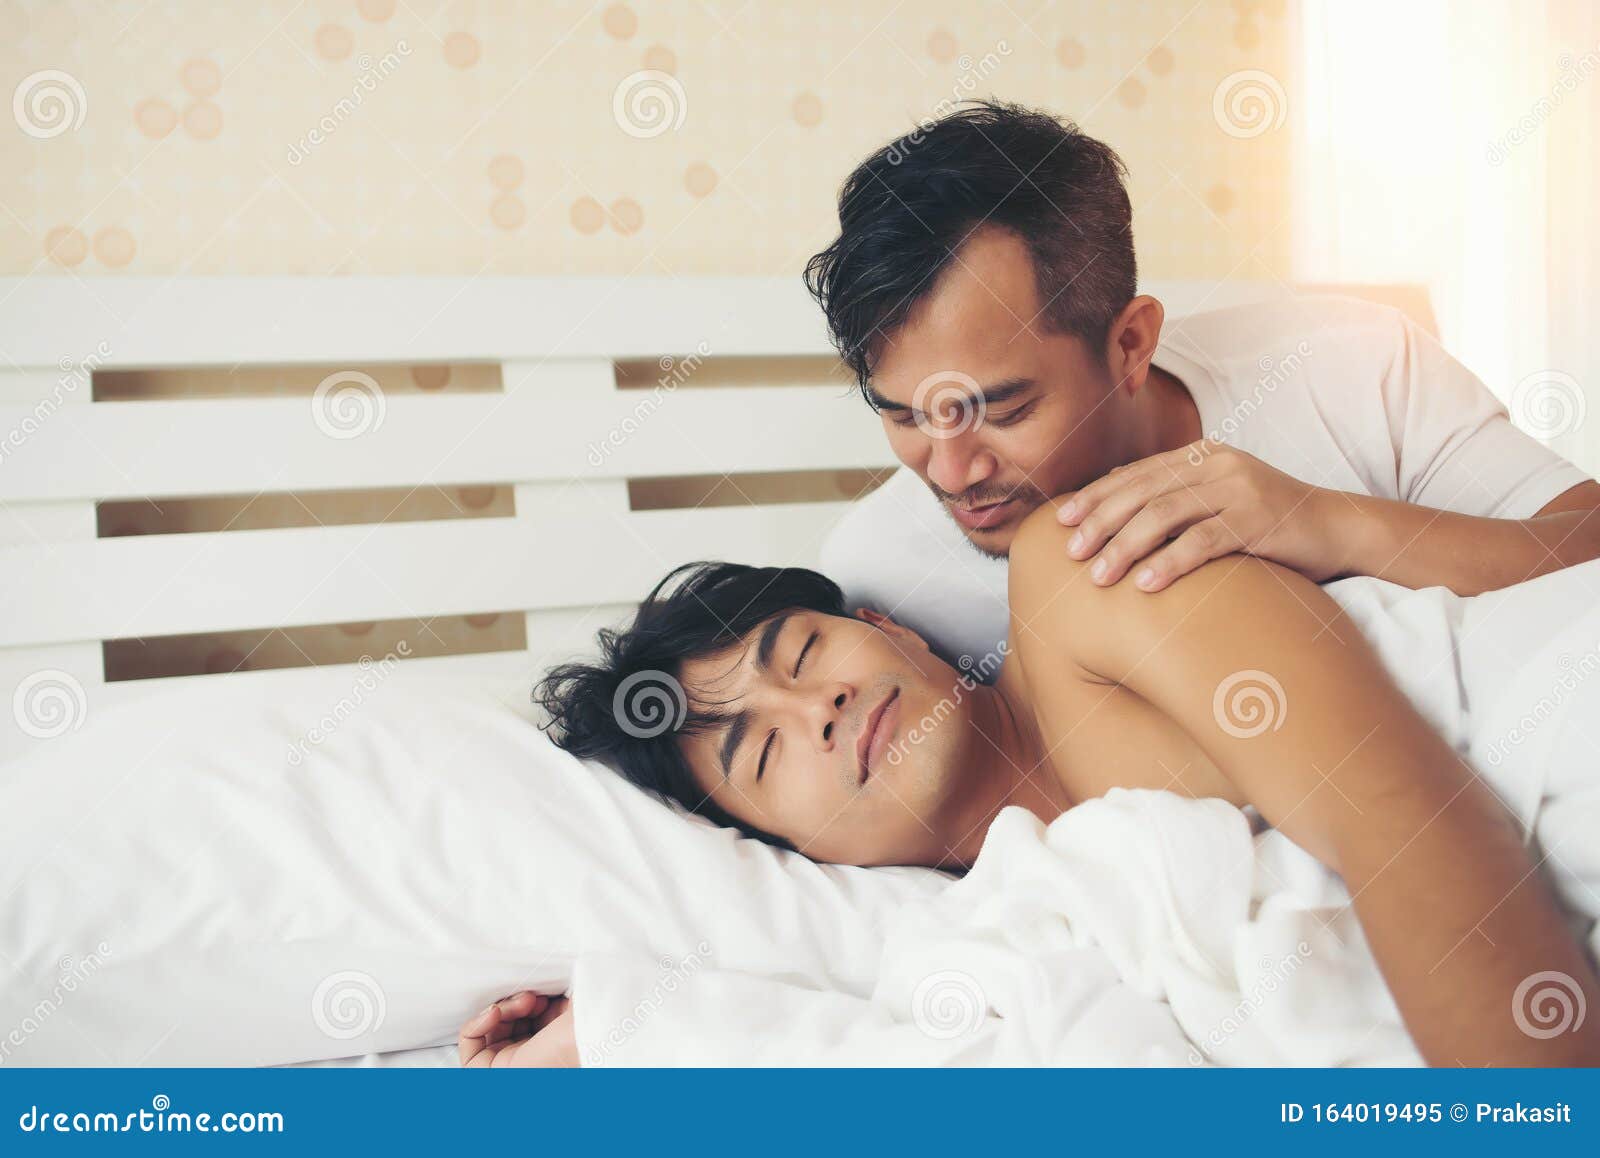 Gay Couple Love Time Stock Image Image Of Passion Kiss 164019495